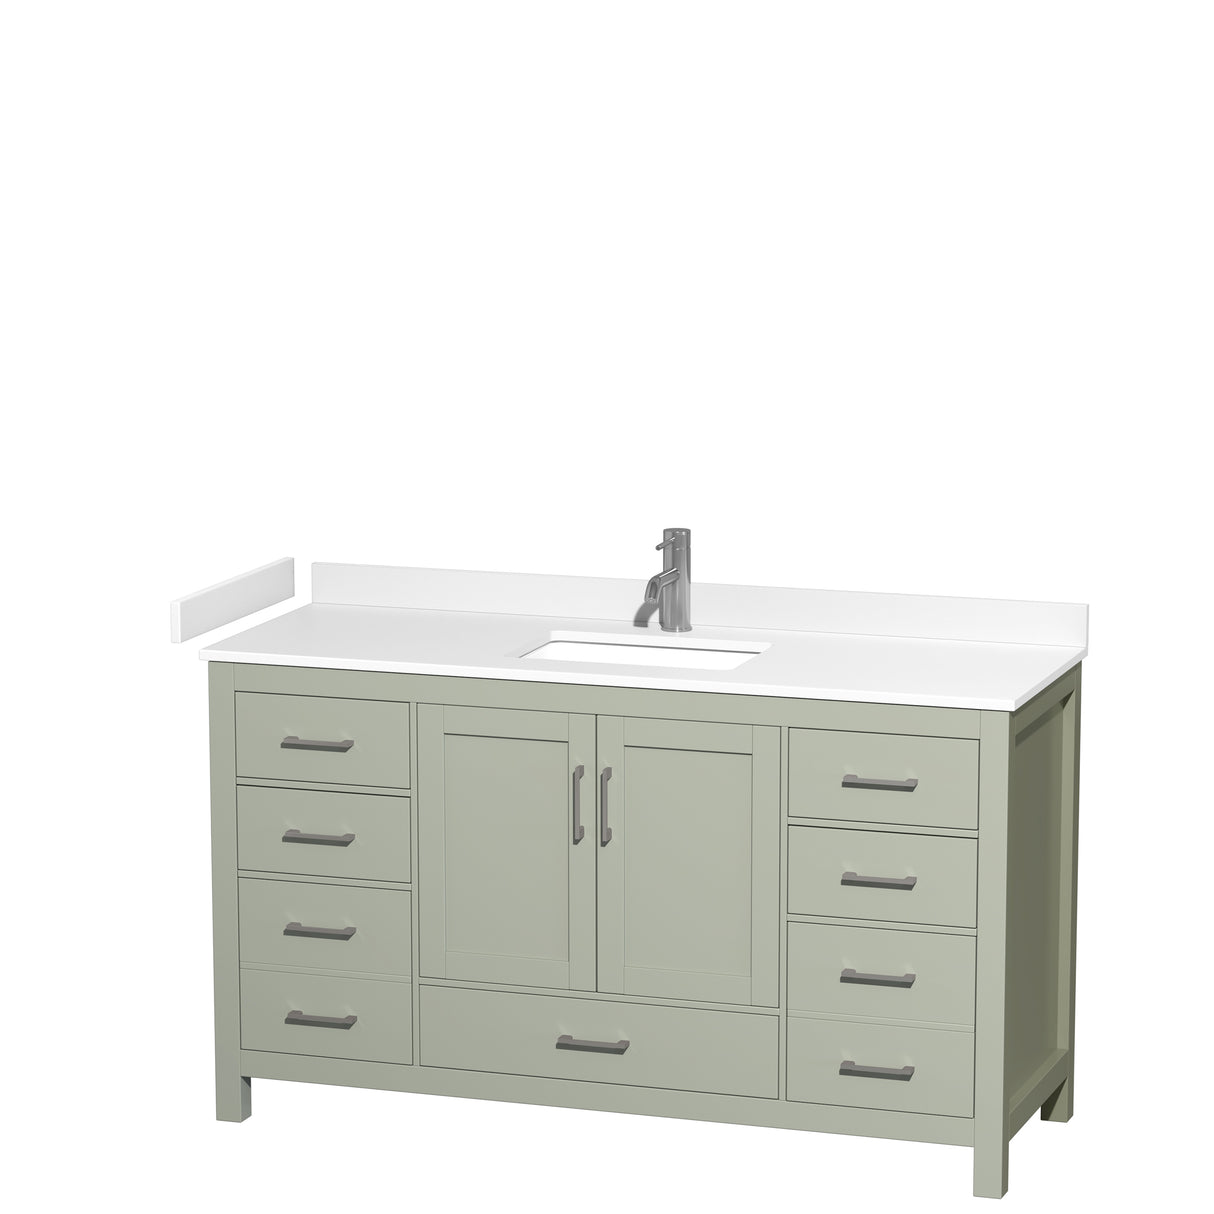 Sheffield 60 inch Single Bathroom Vanity in Light Green White Cultured Marble Countertop Undermount Square Sink Brushed Nickel Trim